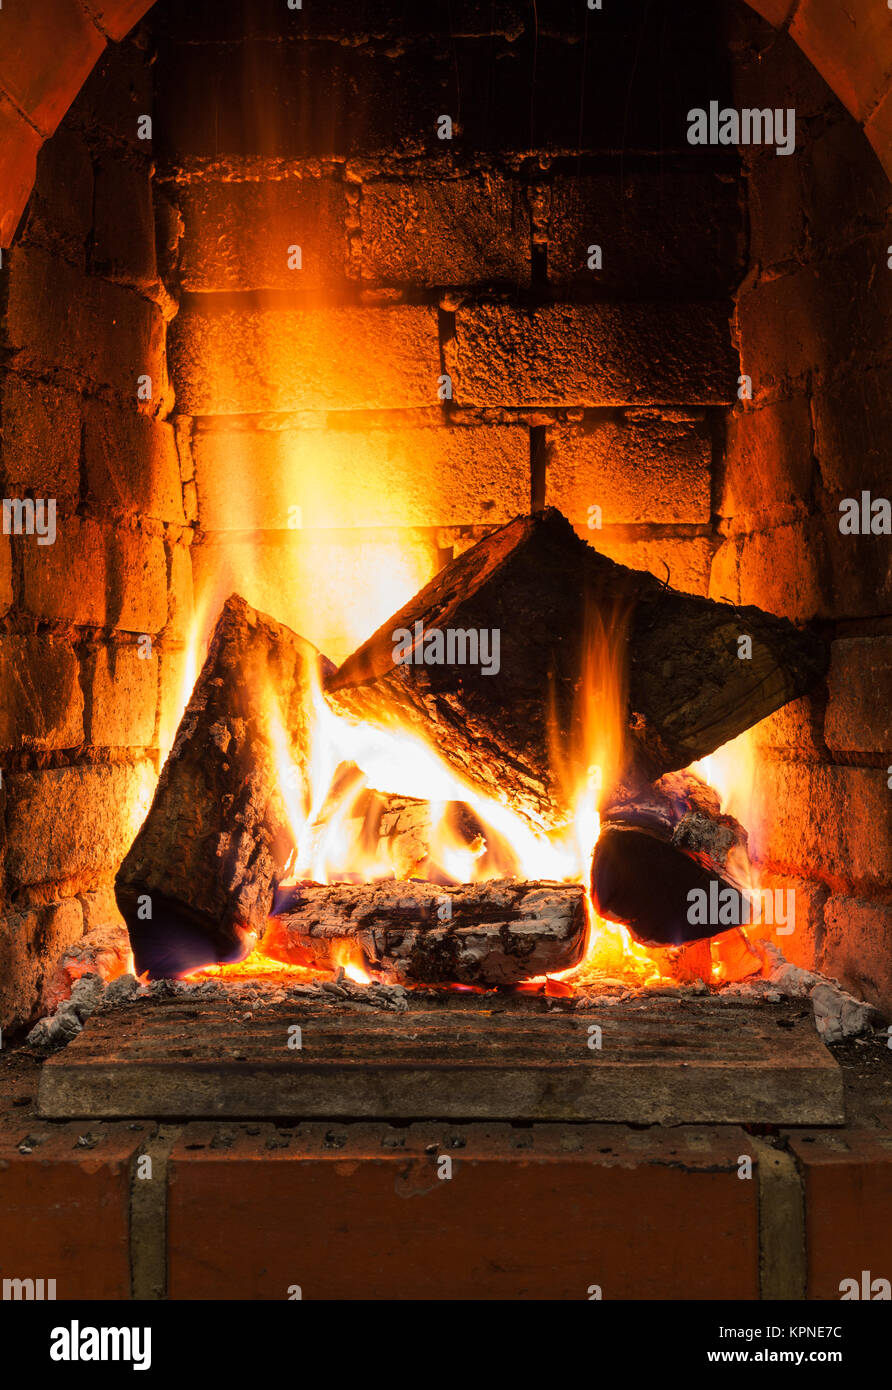 burning firewood in fire-box of fireplace Stock Photo